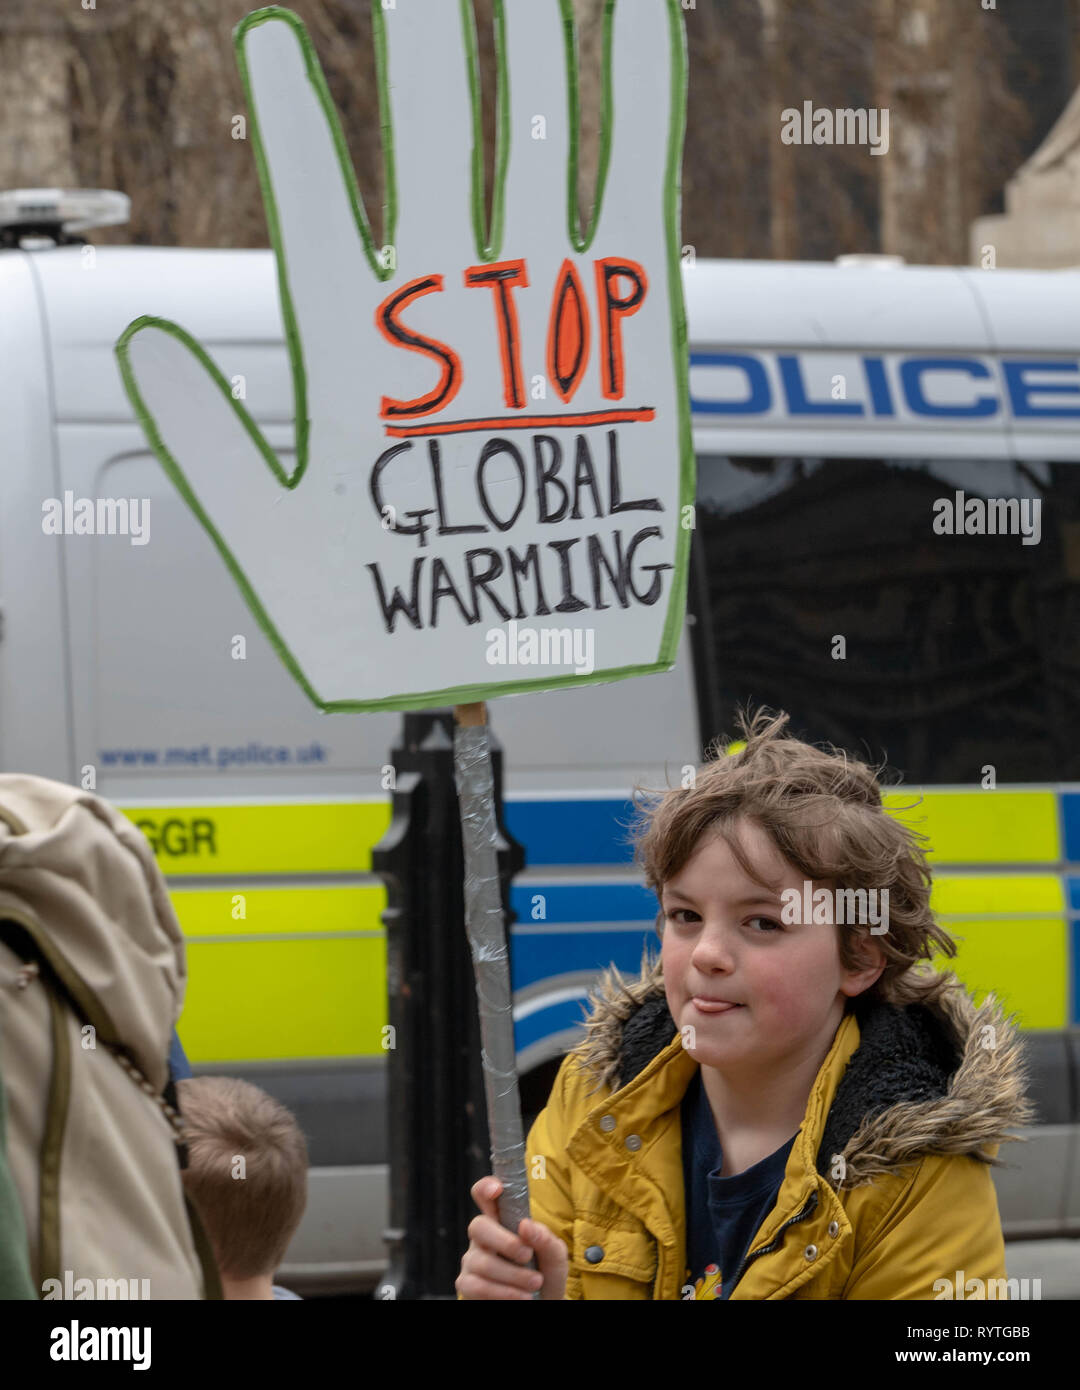 London, UK. 15th Mar 2019. Mass student climate change protest in central London Credit: Ian Davidson/Alamy Live News Stock Photo